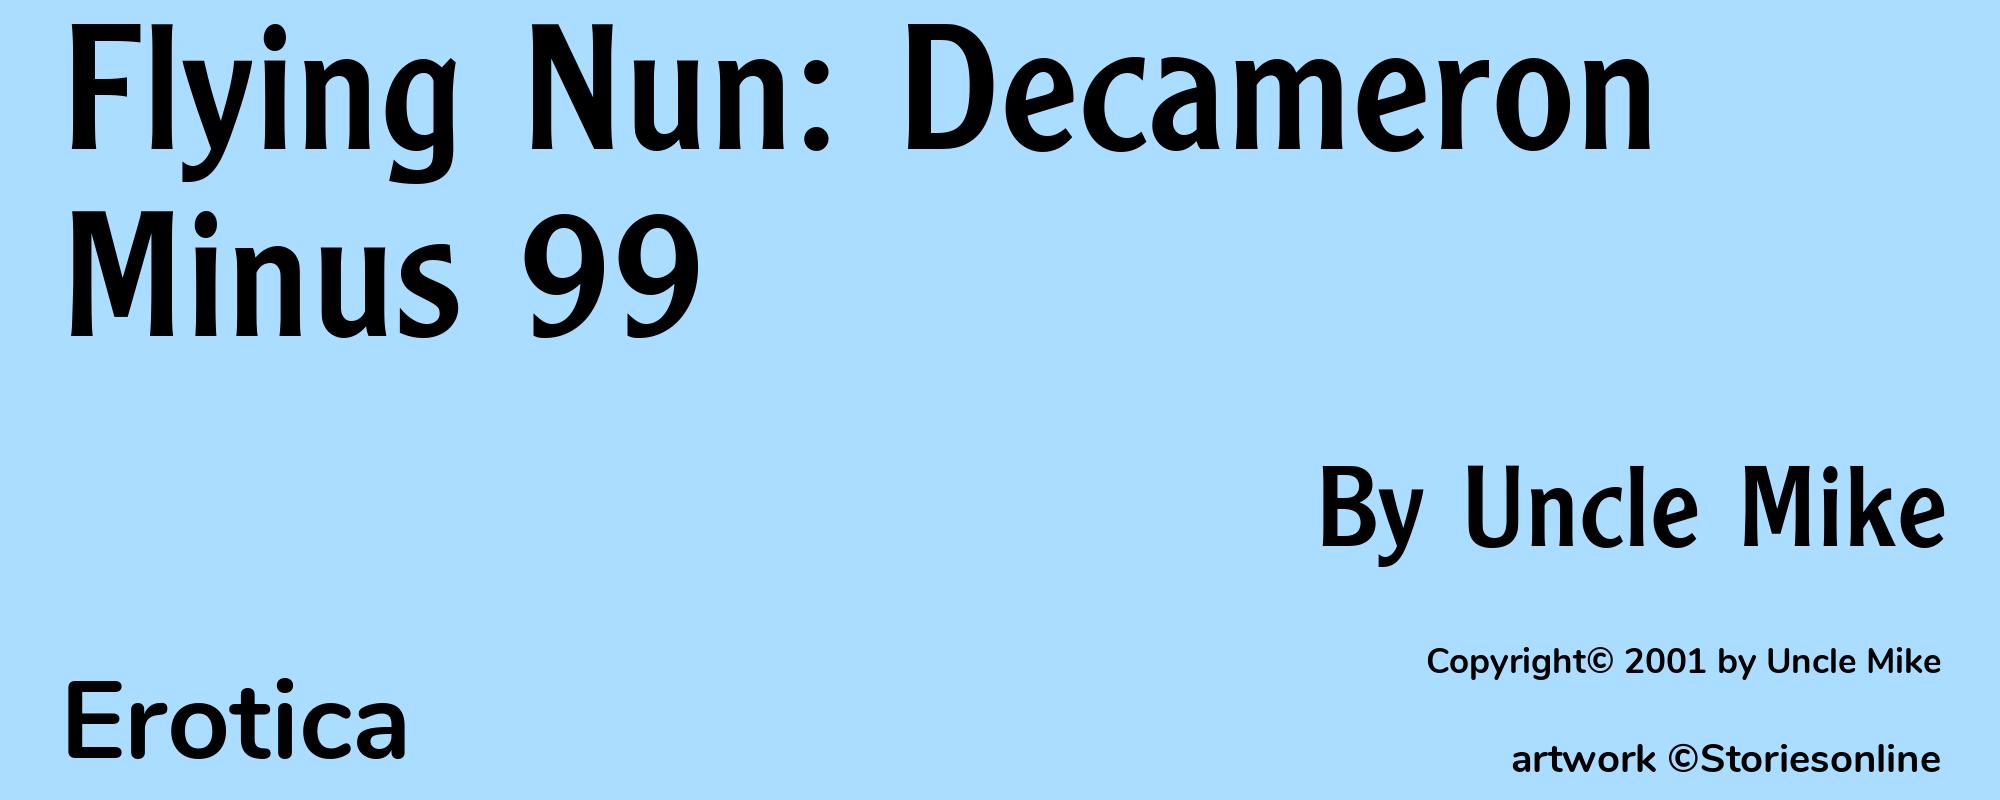 Flying Nun: Decameron Minus 99 - Cover